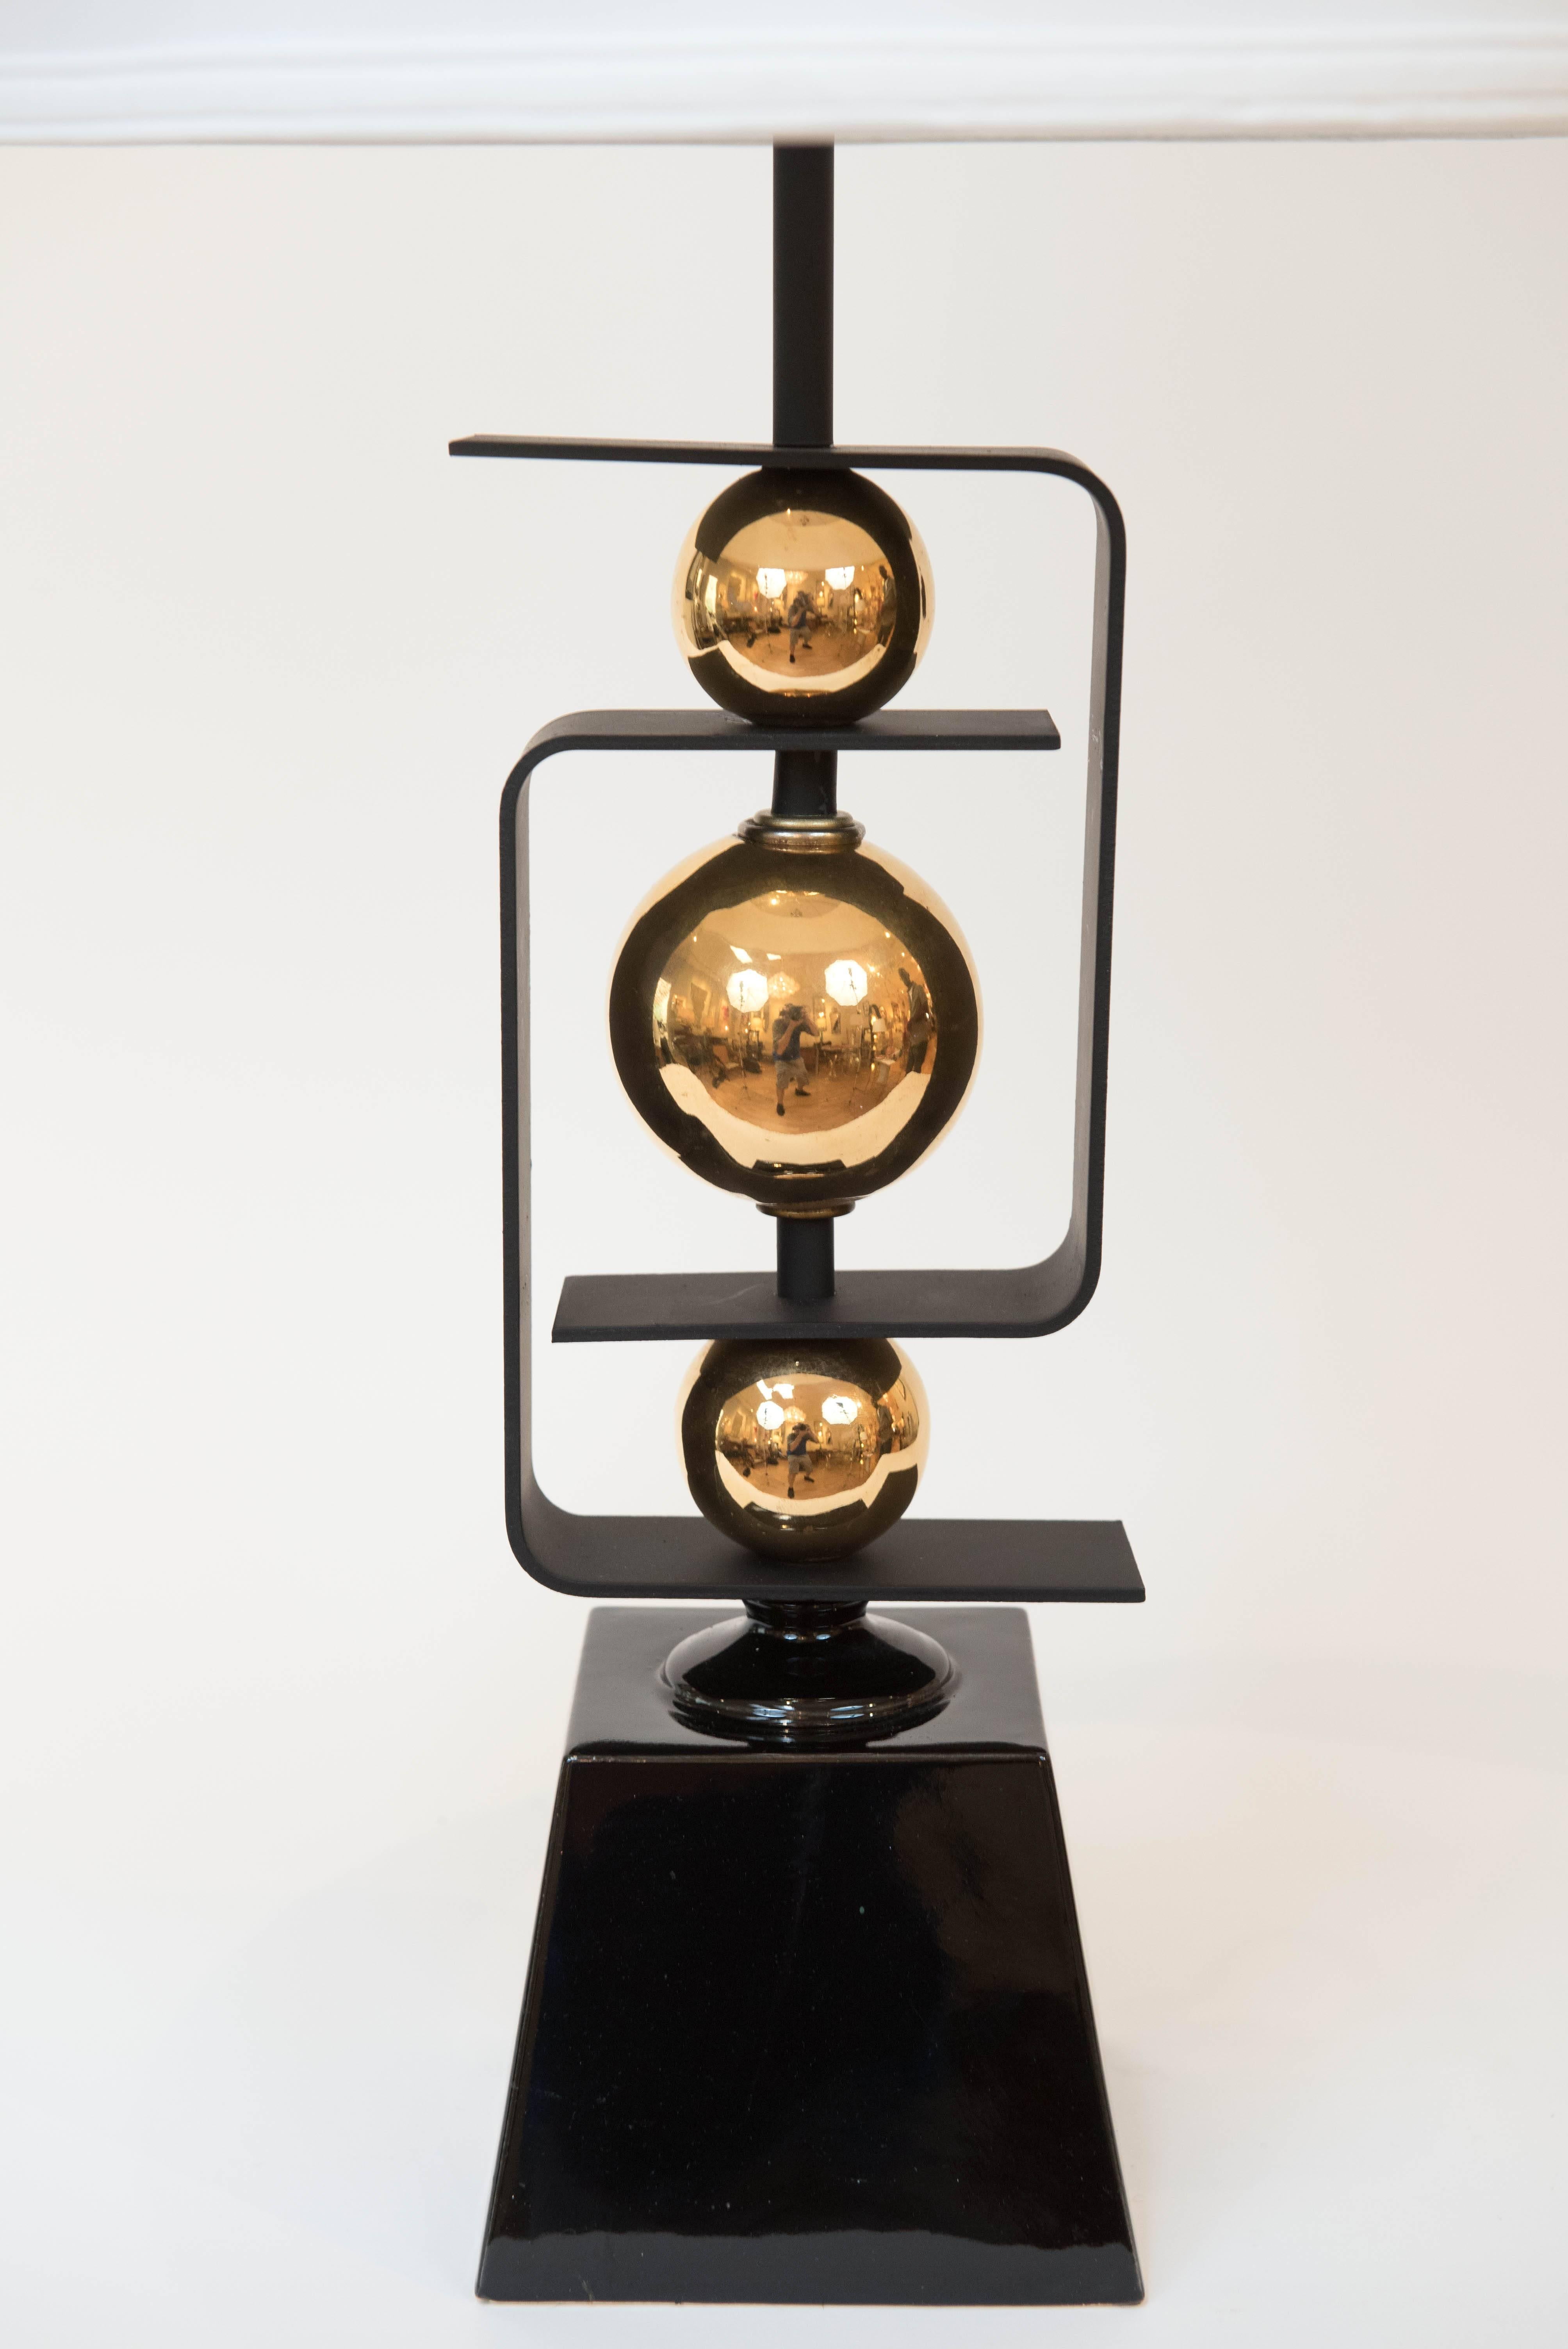 An intriguing and unusual pair of metal framed brass ball lamps with glazed black ceramic bases. Shades are optional. 27